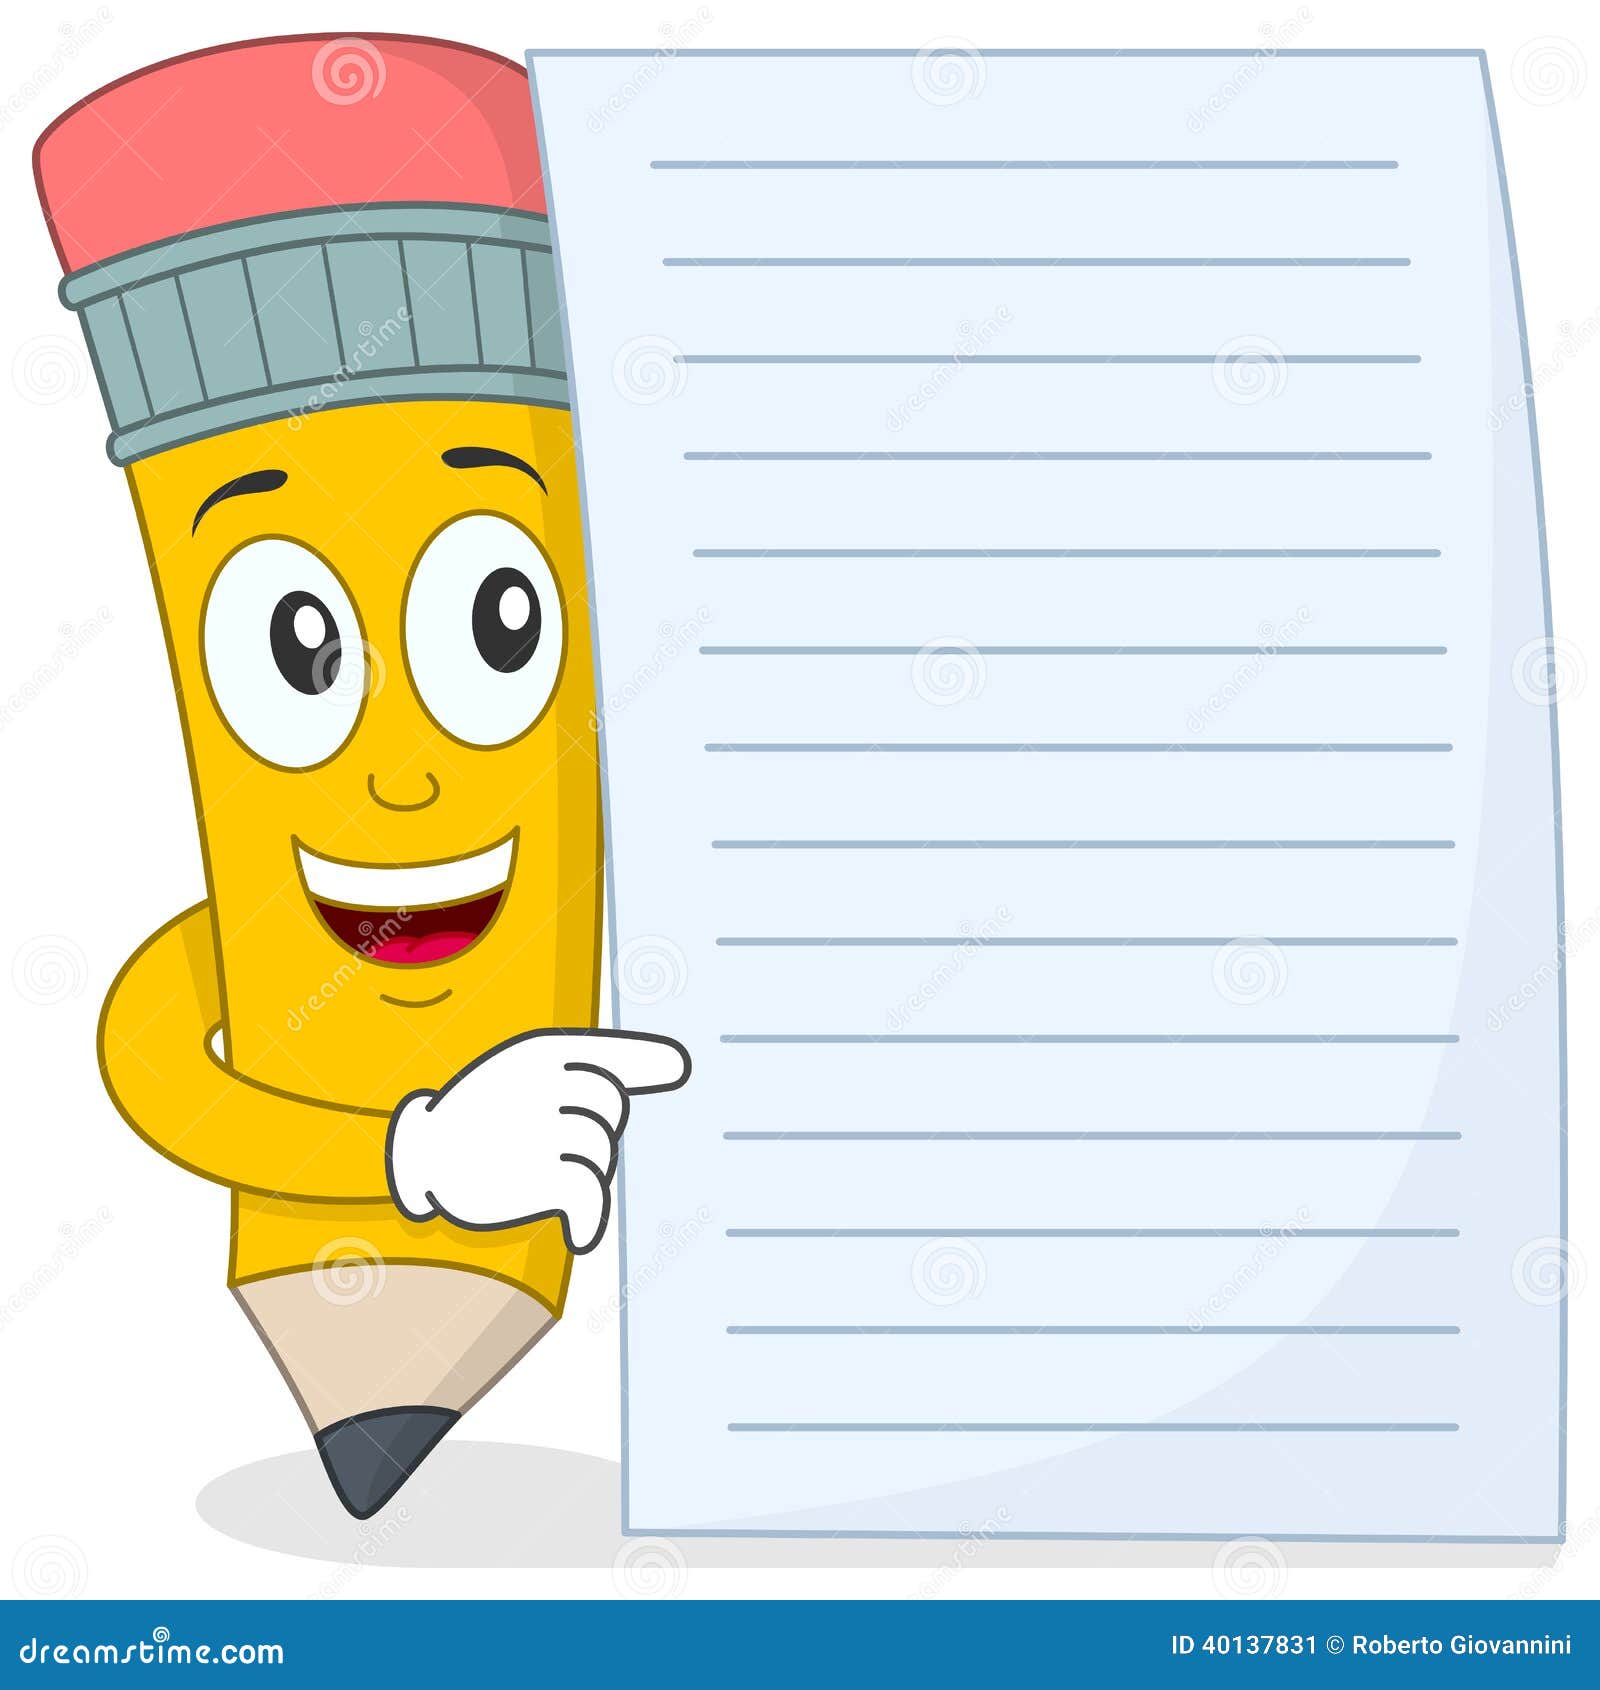 Pencil Character with Blank Paper Stock Vector - Illustration of eraser,  design: 40137831